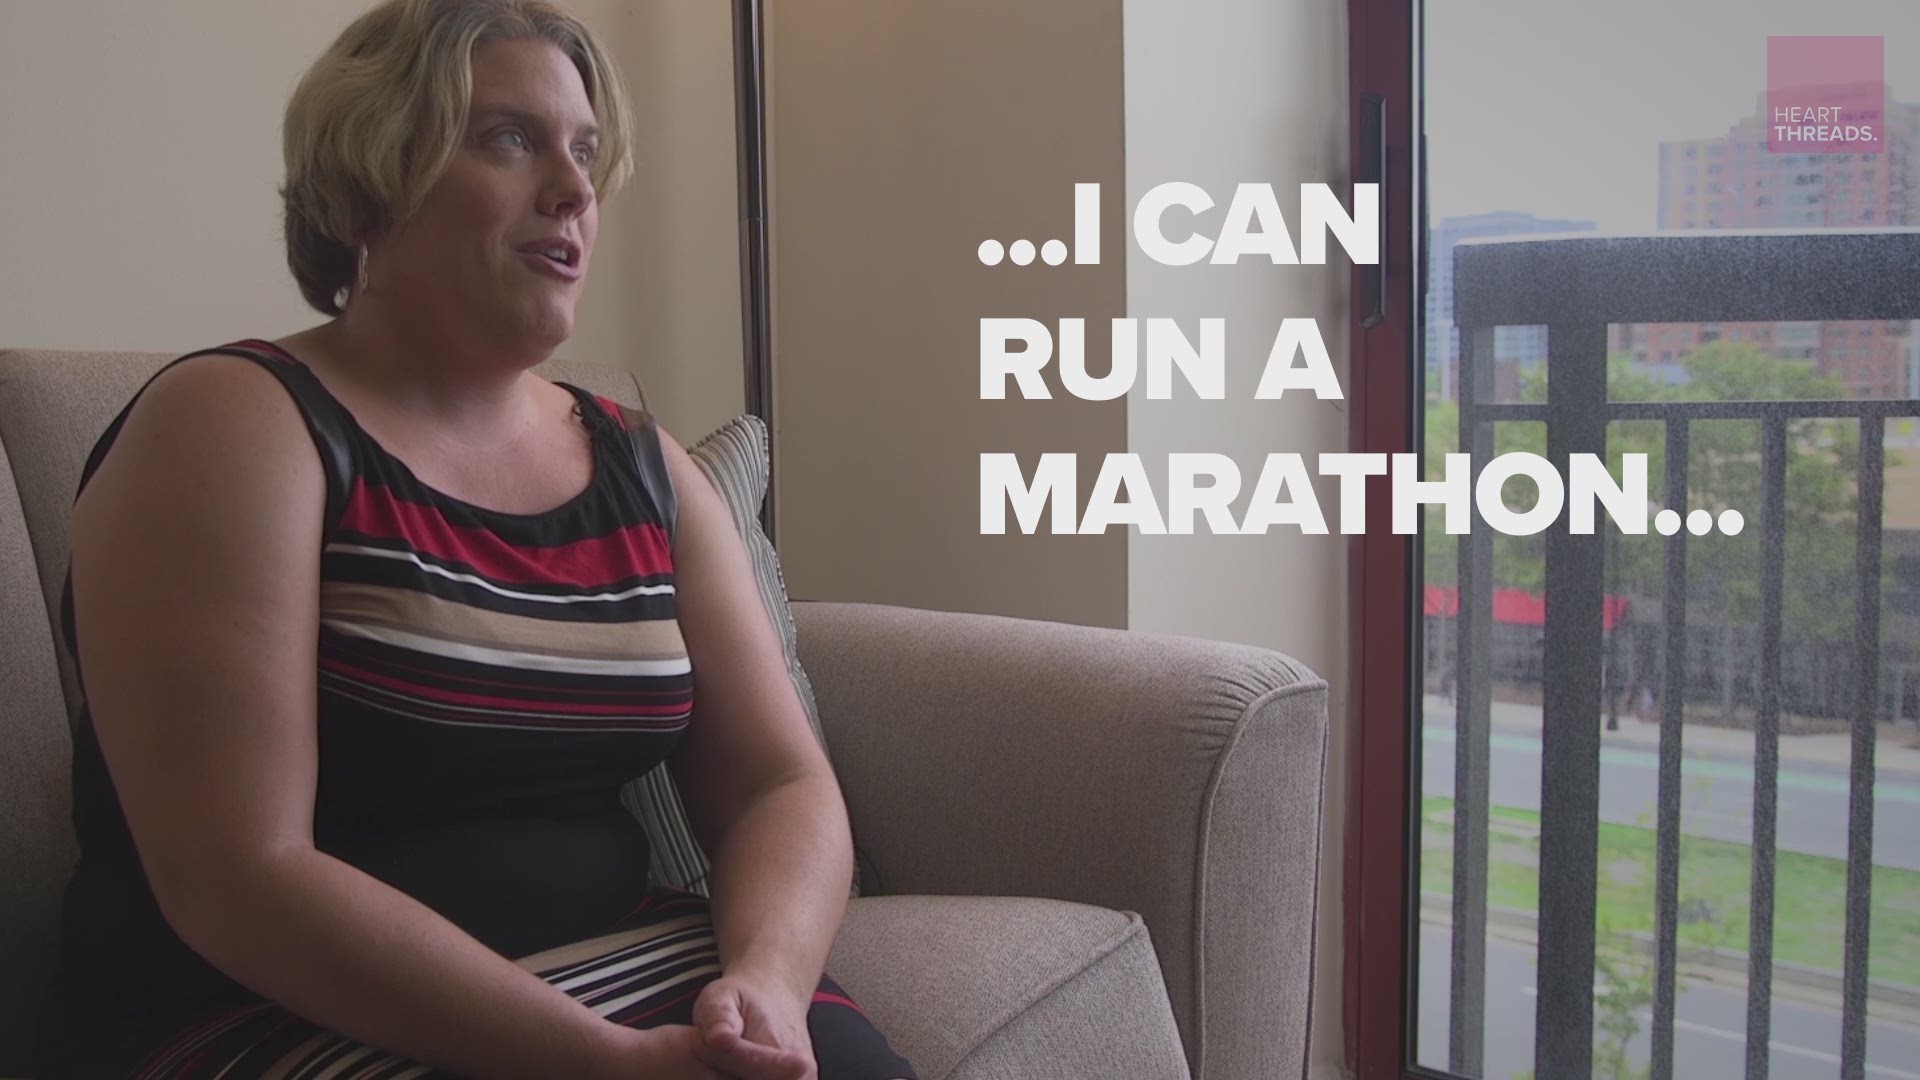 Born with cerebral palsy, Jamie never expected to be a runner. More than 100 races and a marathon later, she's taking on the world one mile at a time.